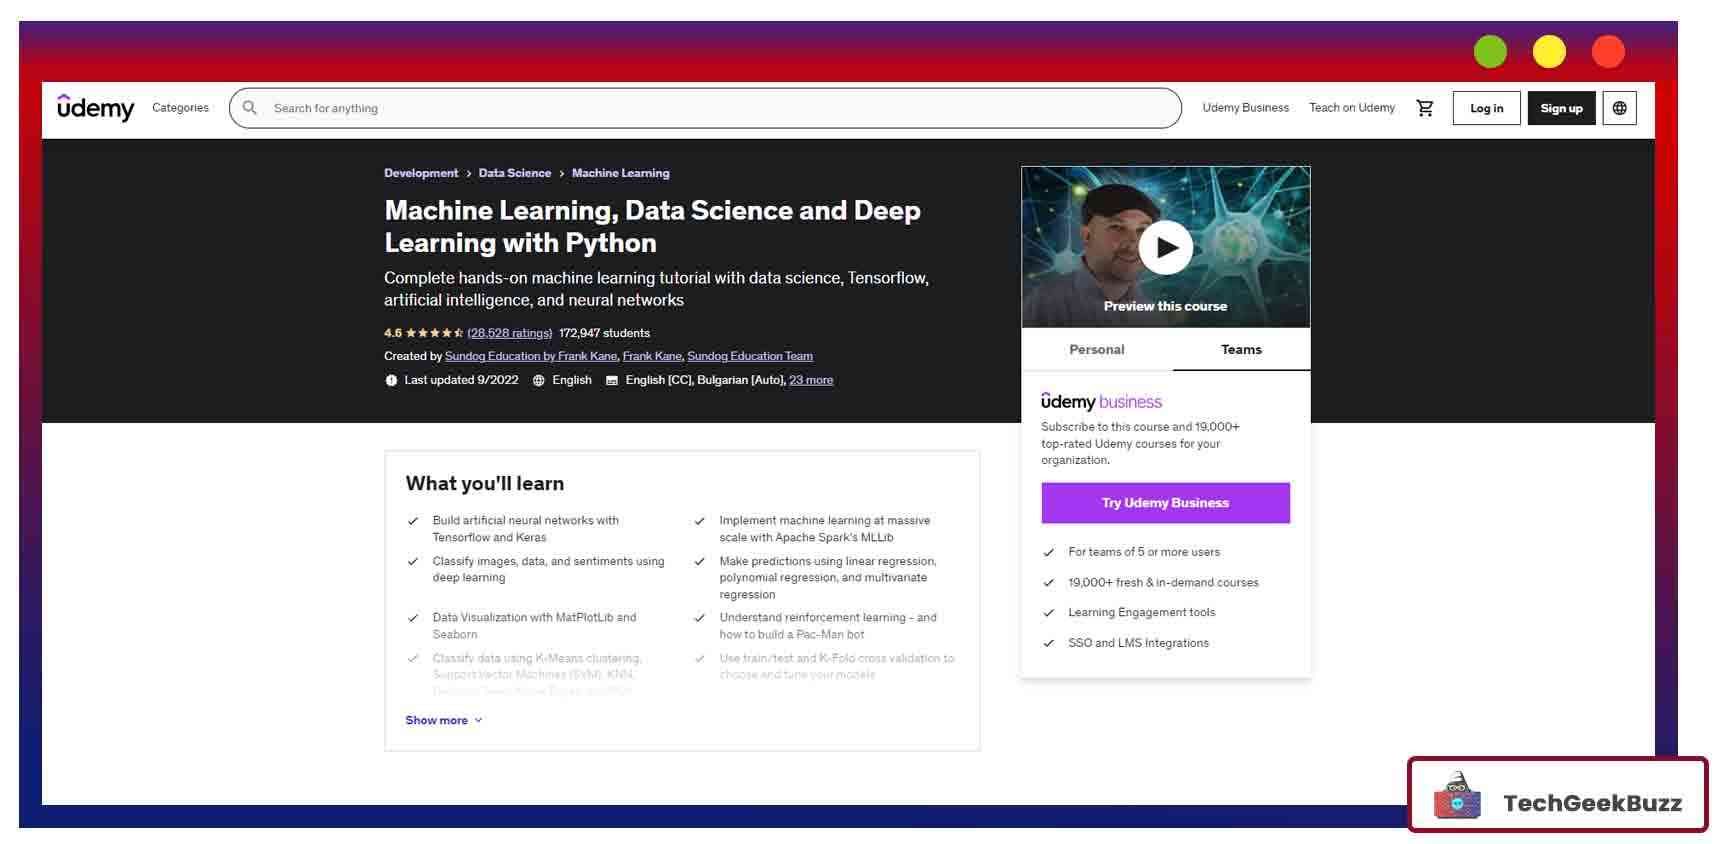 Machine Learning, Data Science and Deep Learning with Python